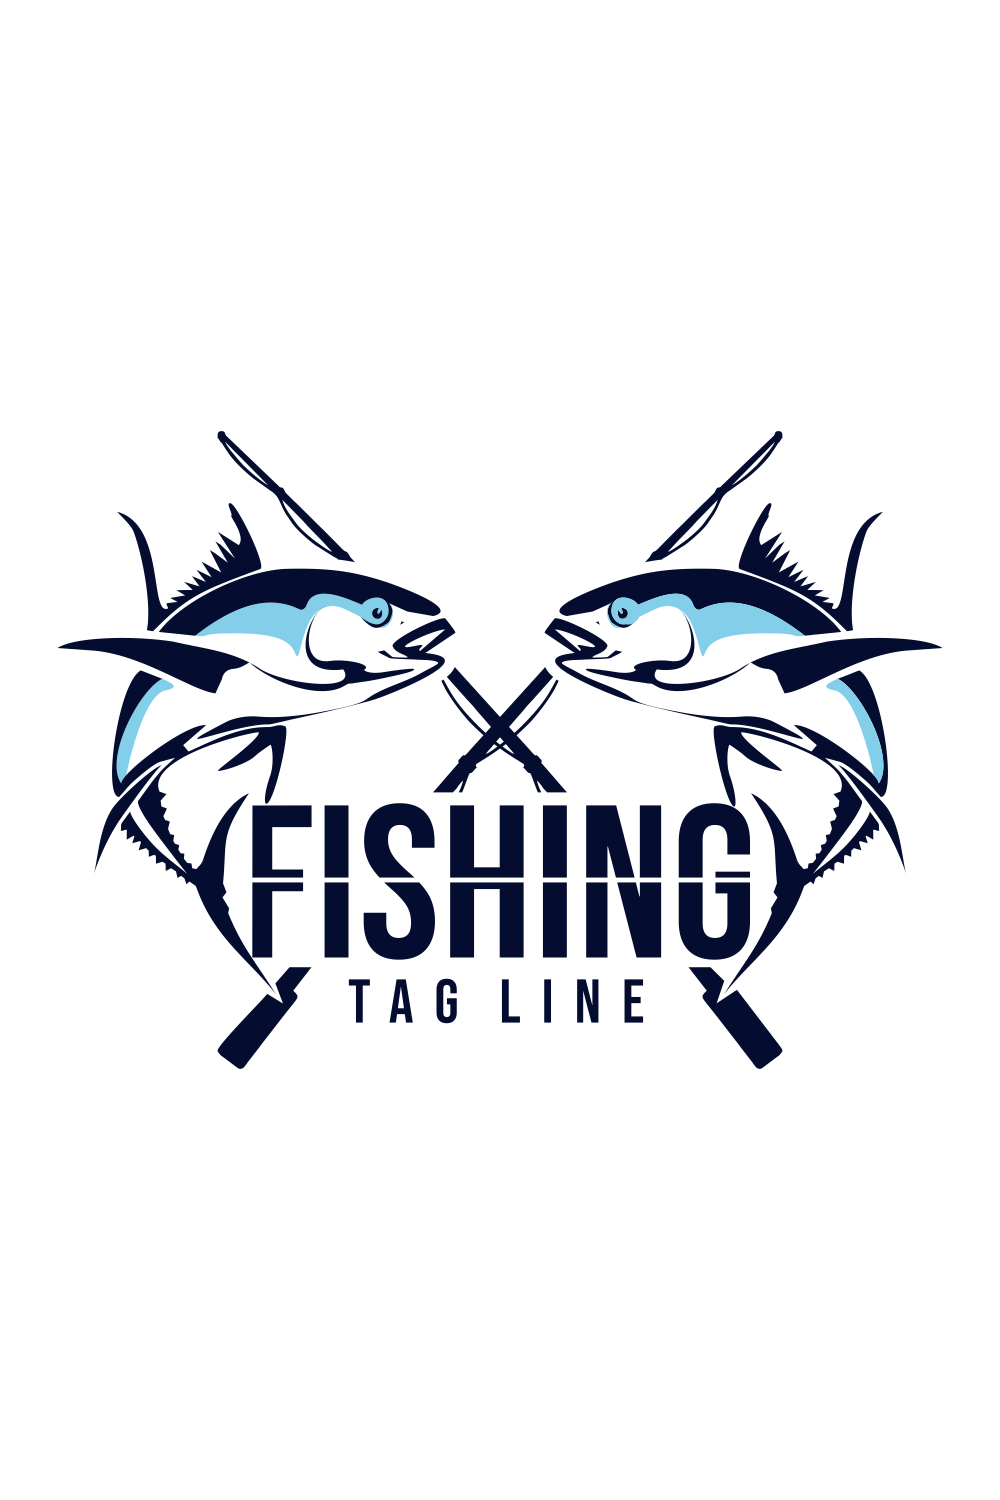 Fishing logo two Bass fish with two fishing rod symbols Fishing theme vector illustration pinterest preview image.